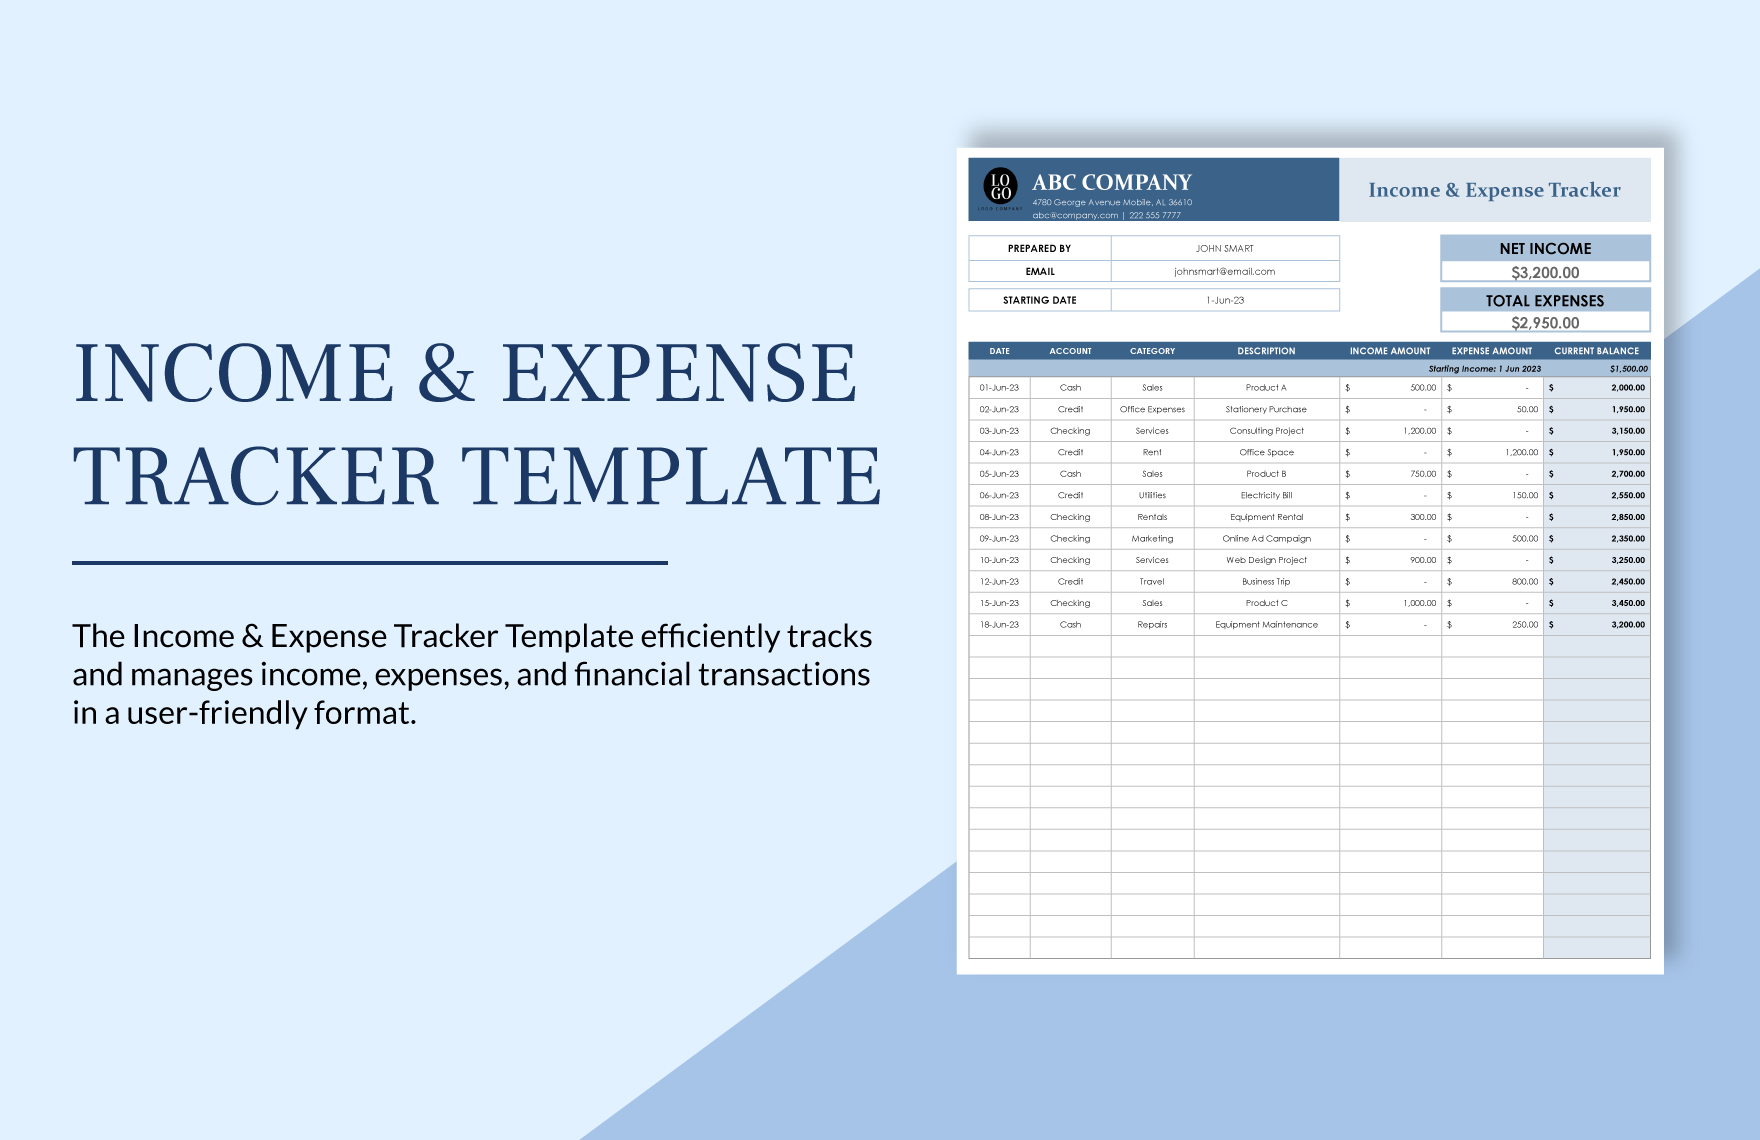 Income & Expense Tracker Template